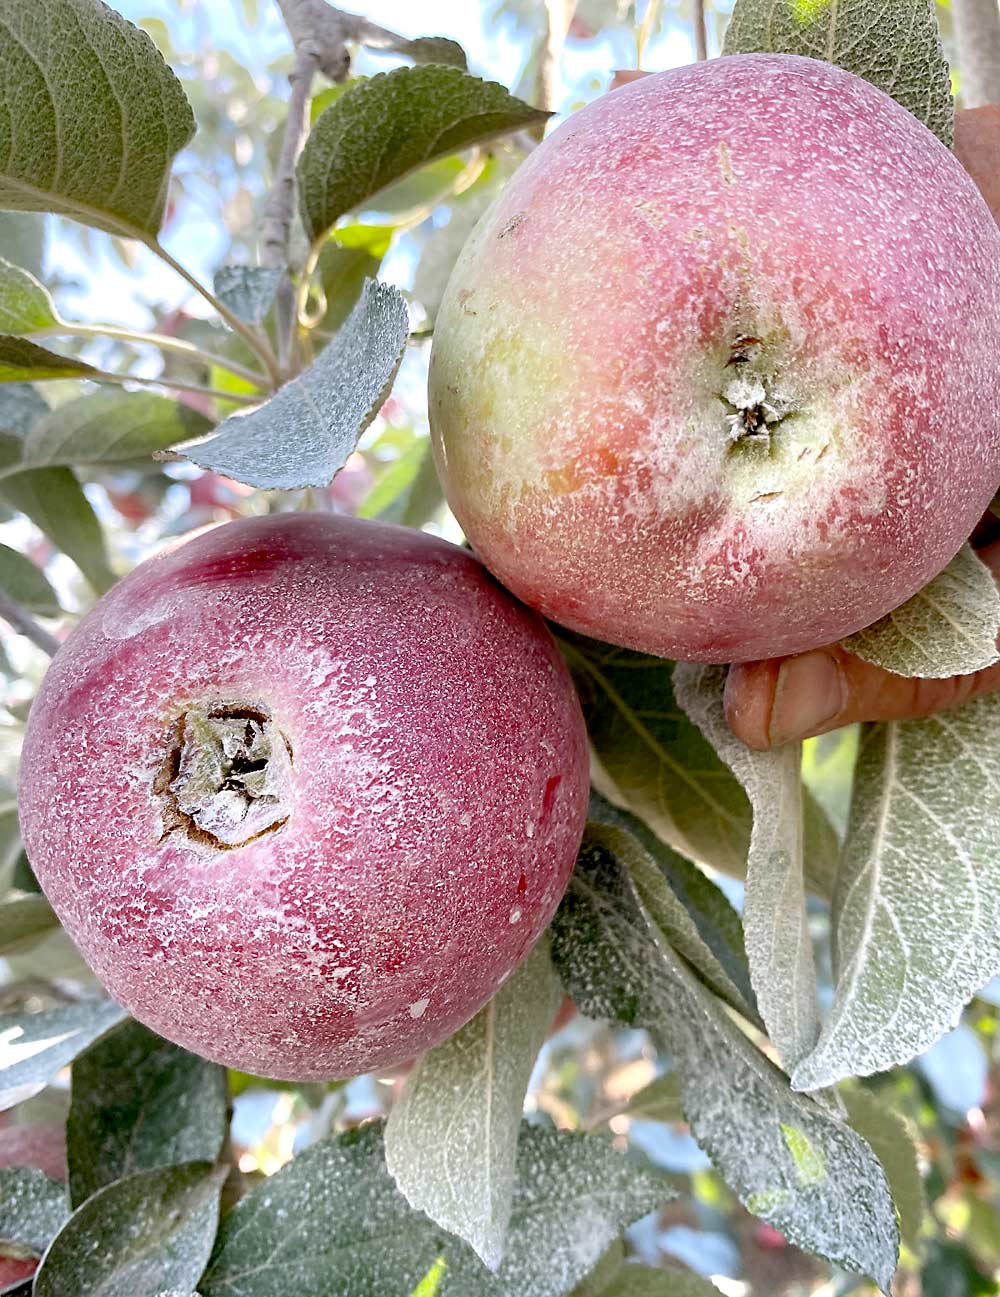 WA 38 apples in late September show calyx cracking, which researchers at least partially attribute to frost and poor weather during pollination. (Courtesy Bernardita Sallato/Washington State University)